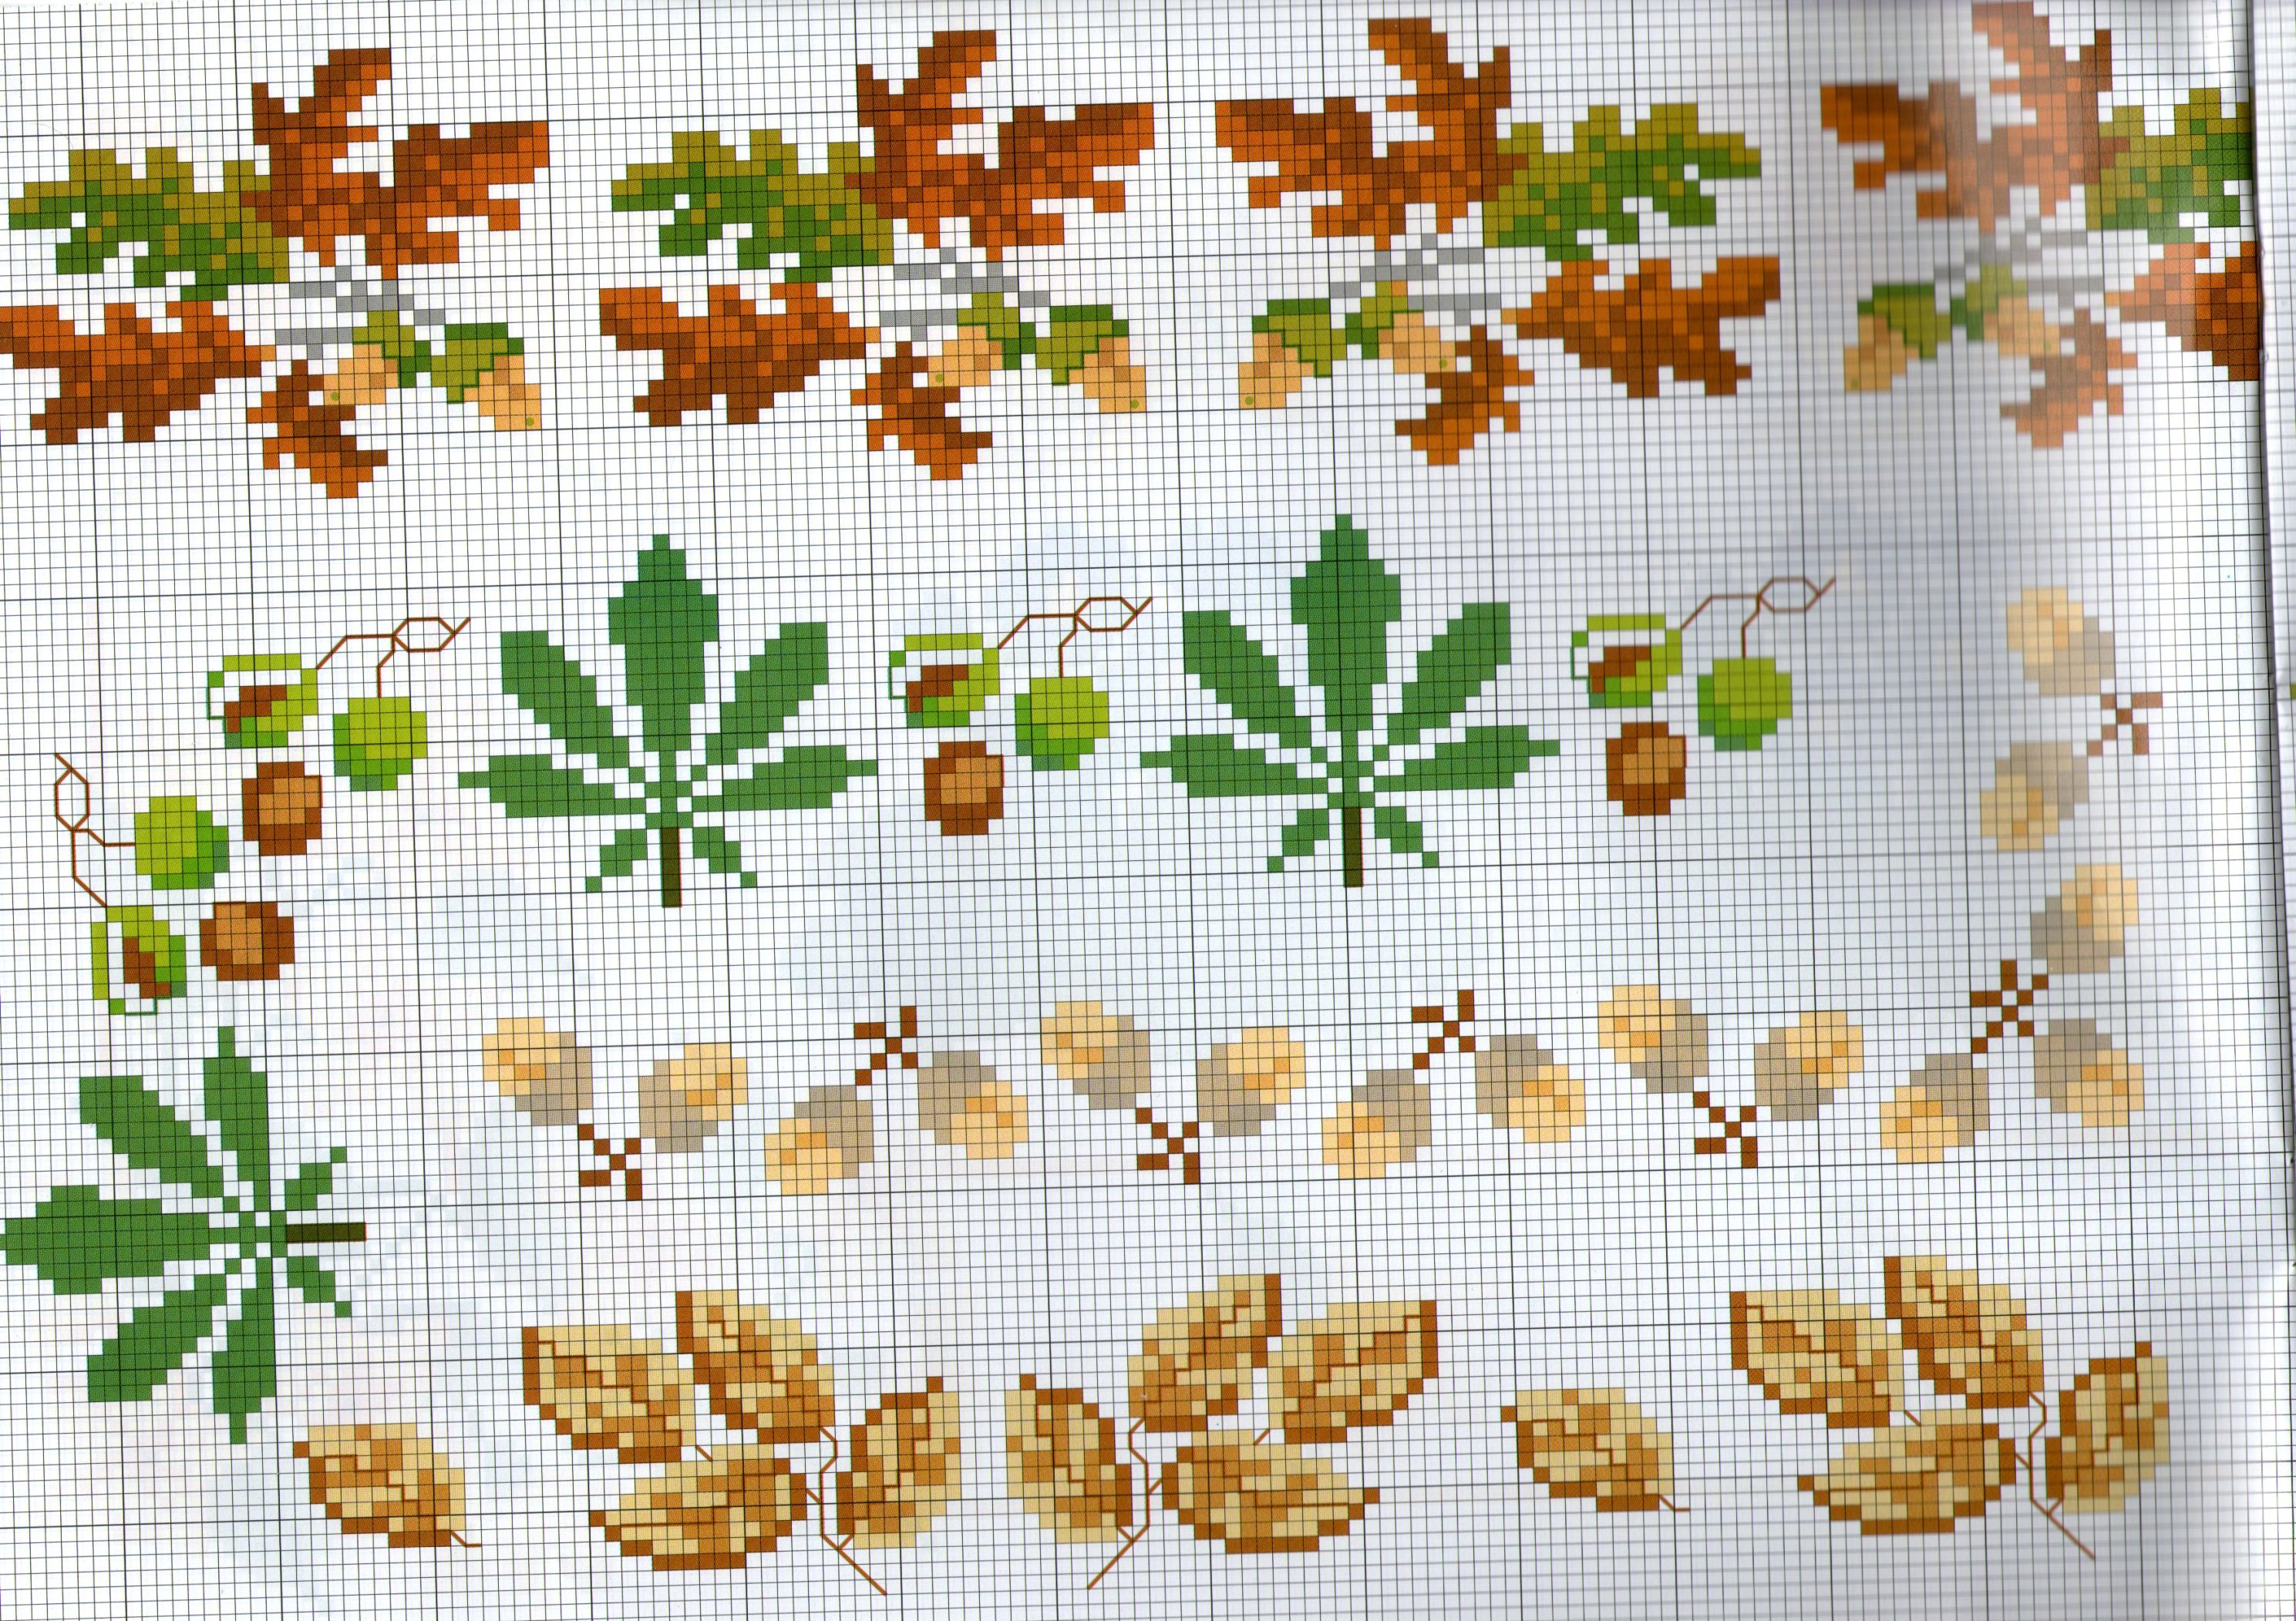 various cross-stitch borders of the forest with acorns